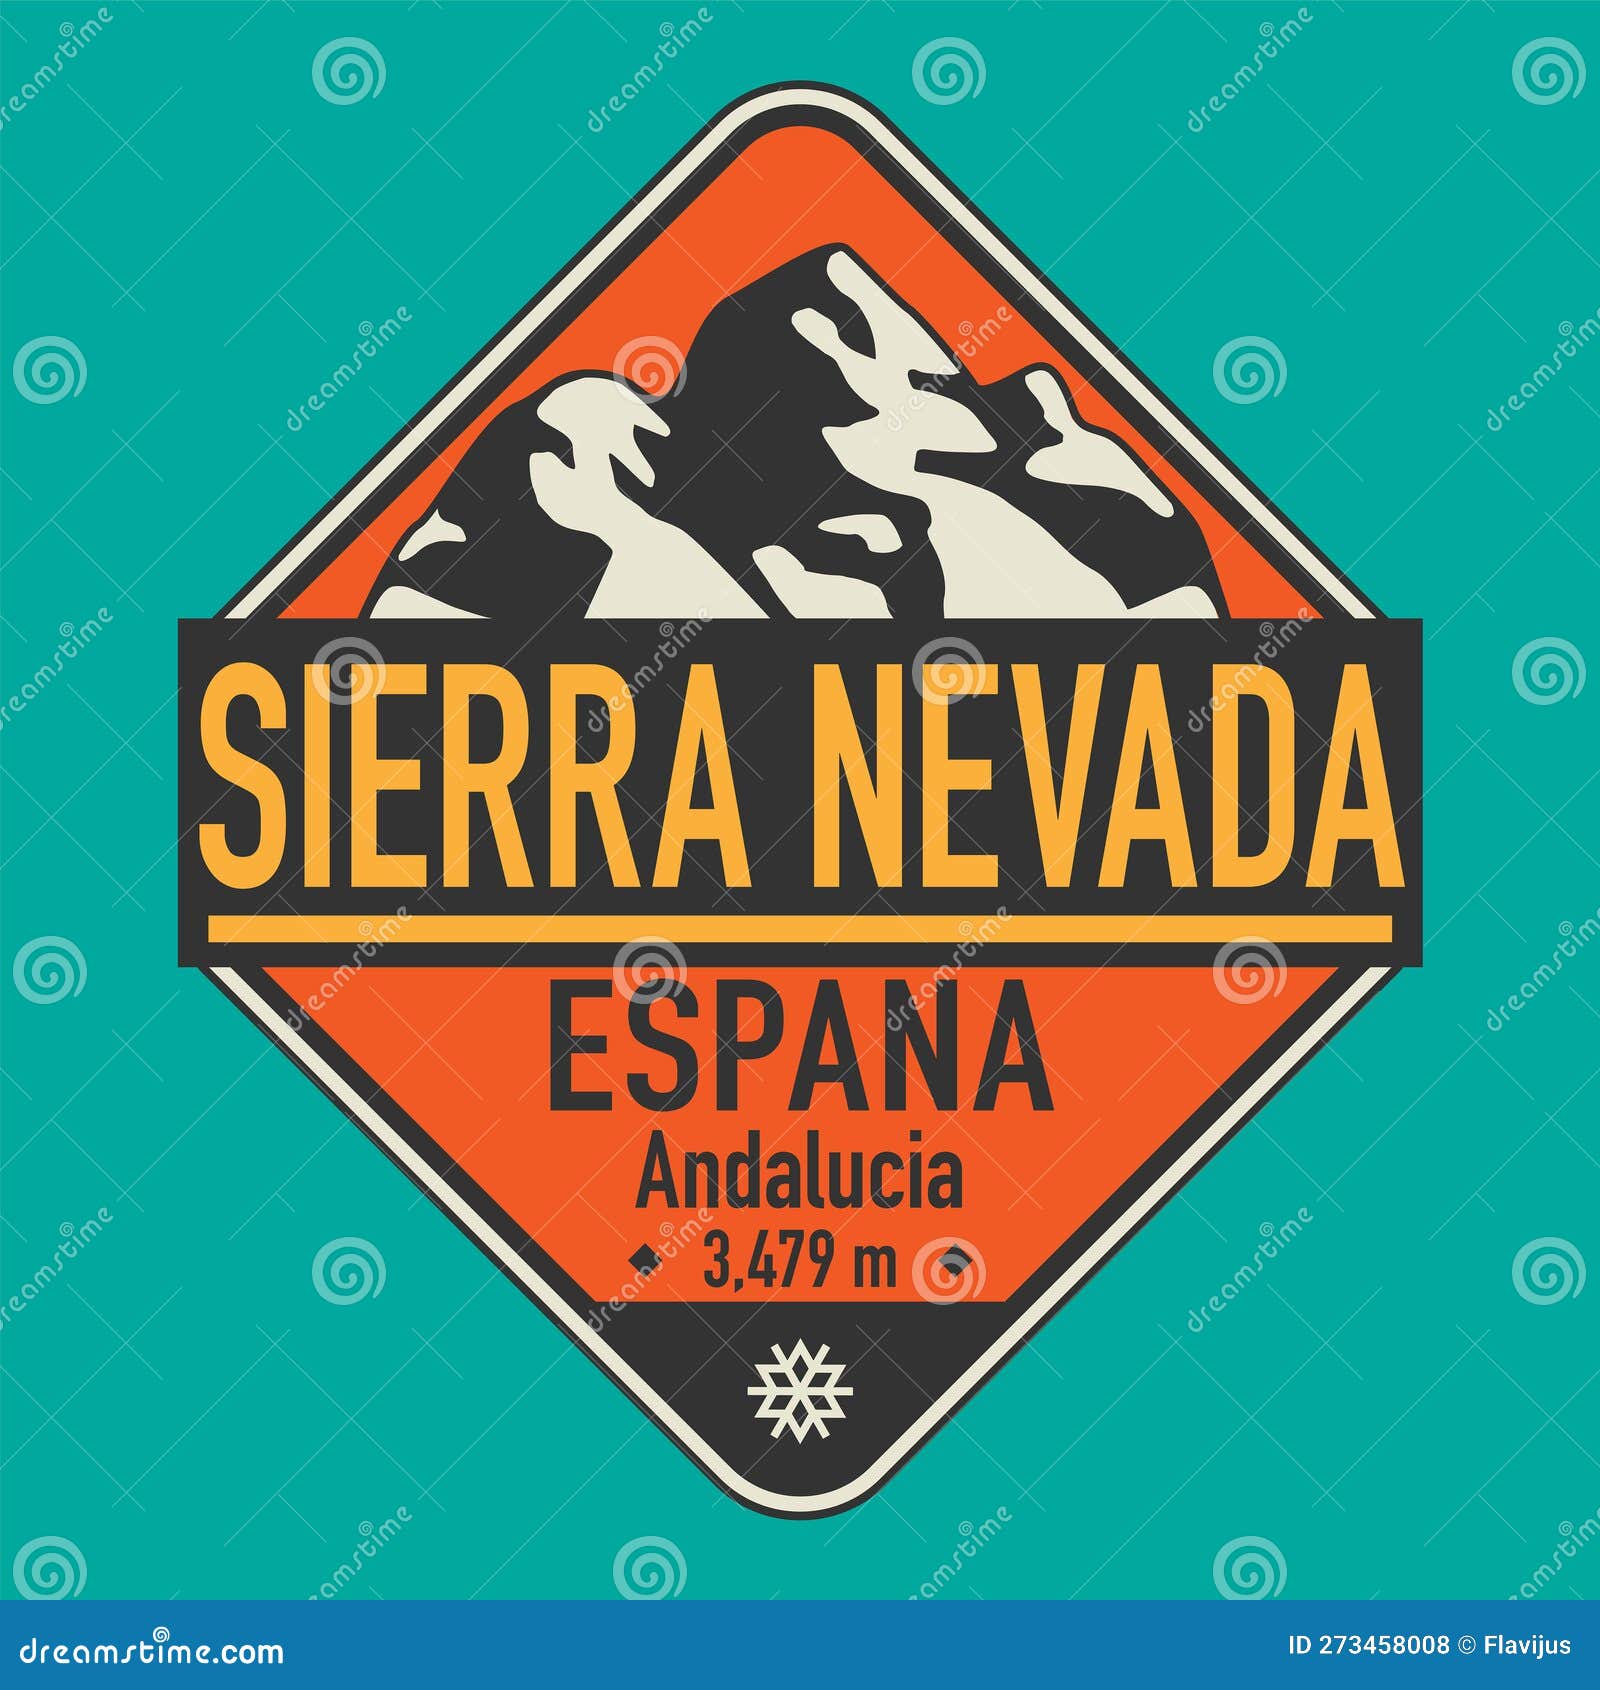 abstract semblem with sierra nevada, spain